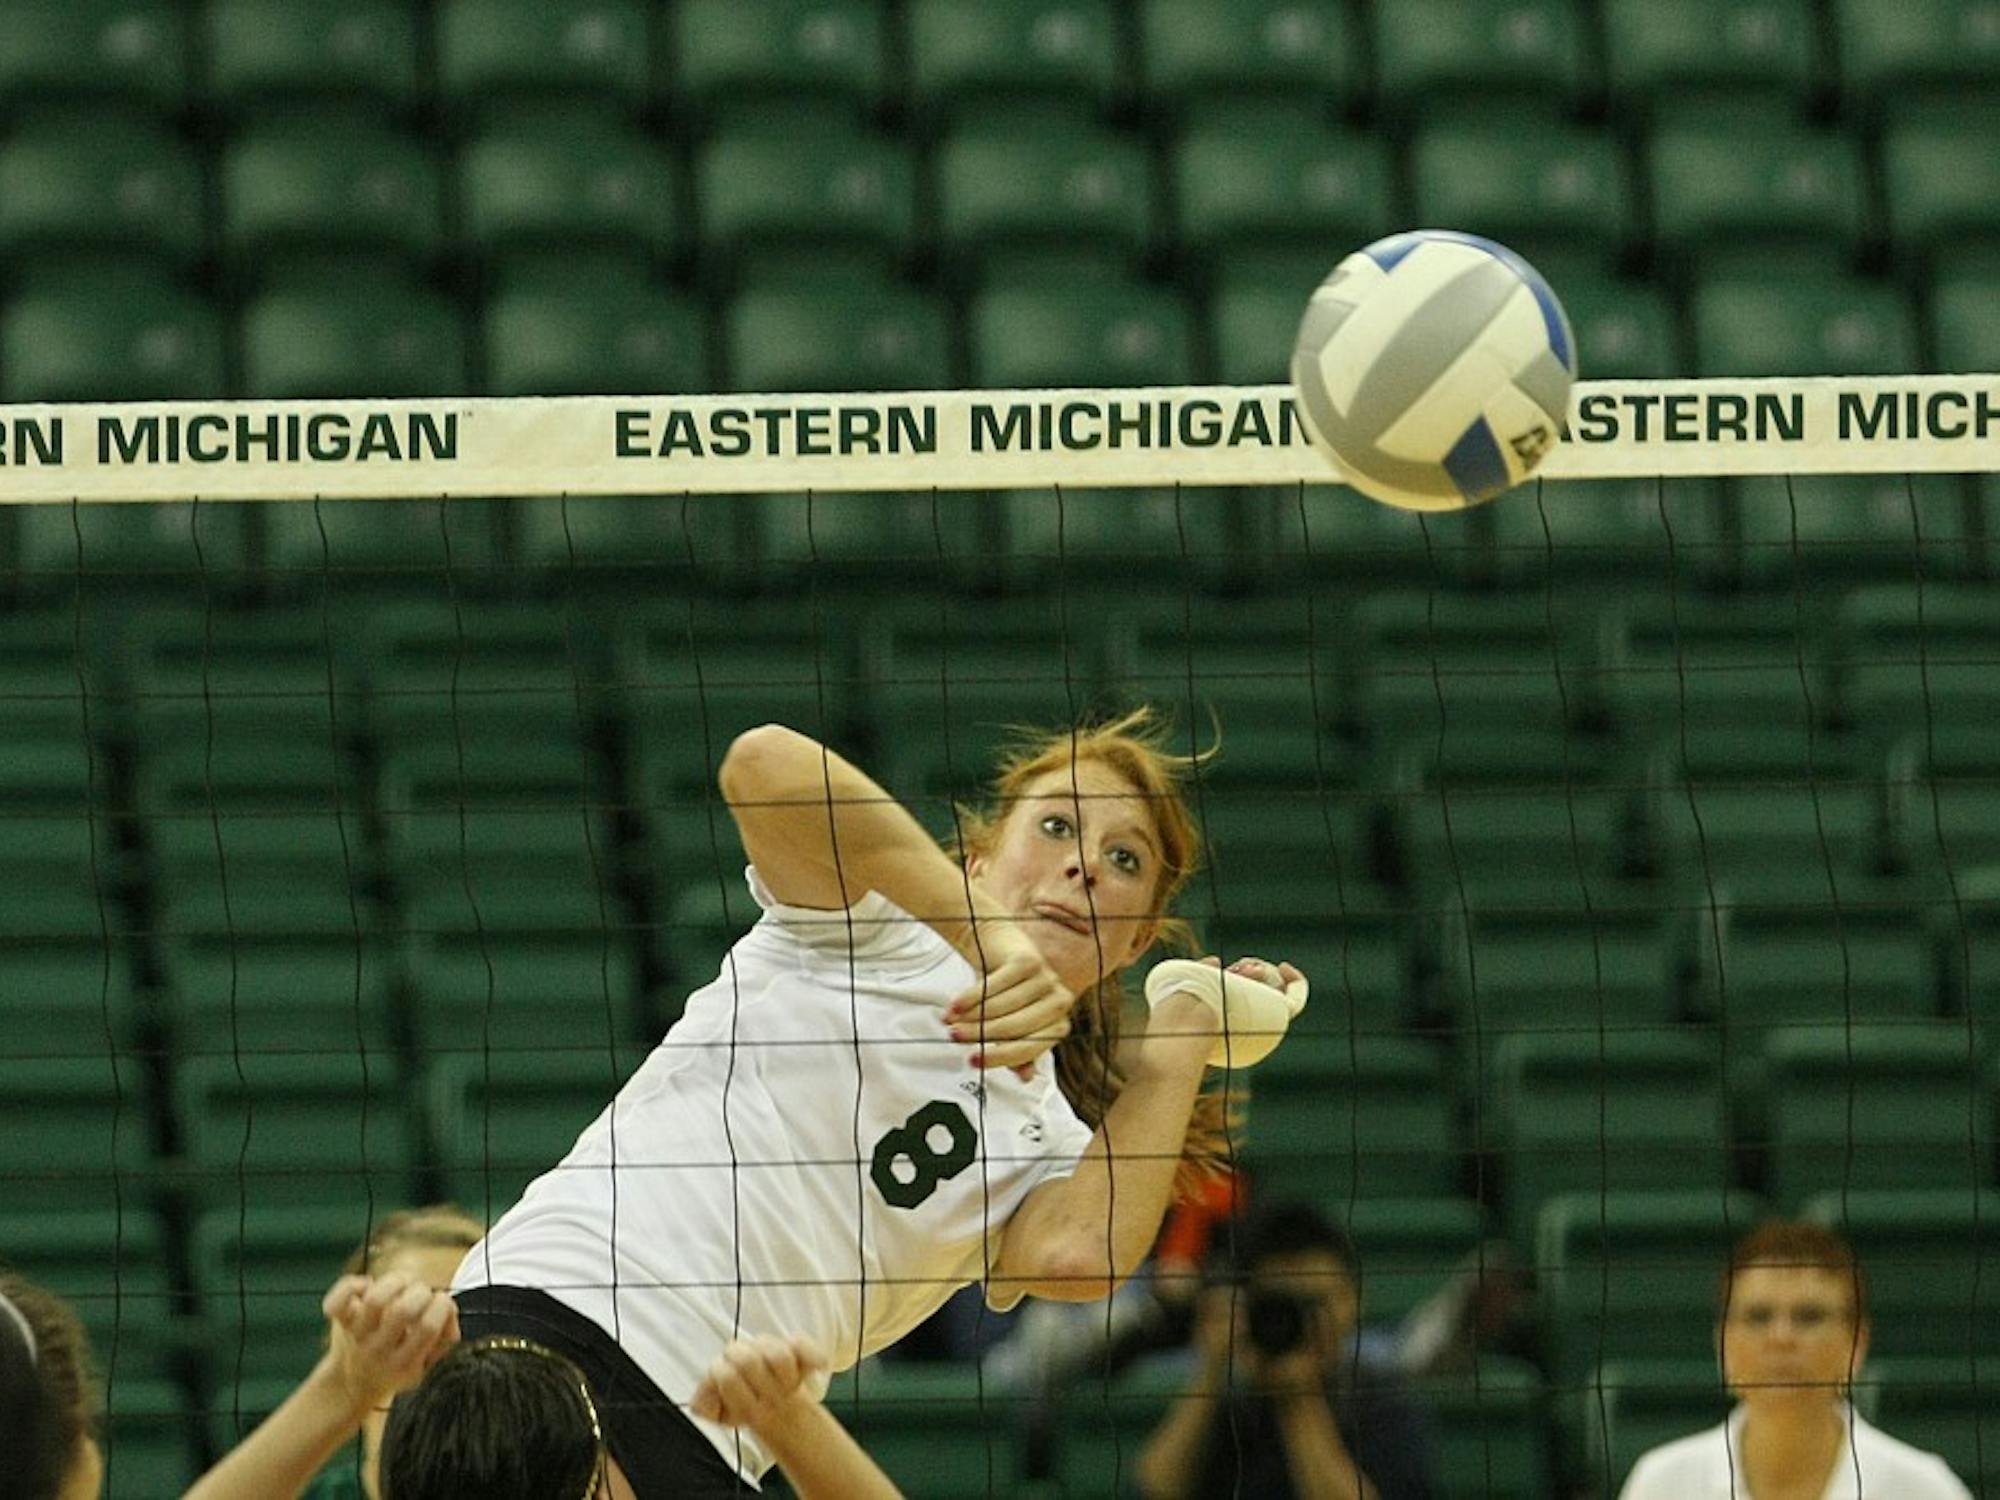 Senior Victoria Randolph spikes the ball Saturday against Western Michigan. She and fellow senior Kim Jarzynka played their final home match at the Convocation Center, but will continue their collegiate careers in the MAC tournament Tuesday.